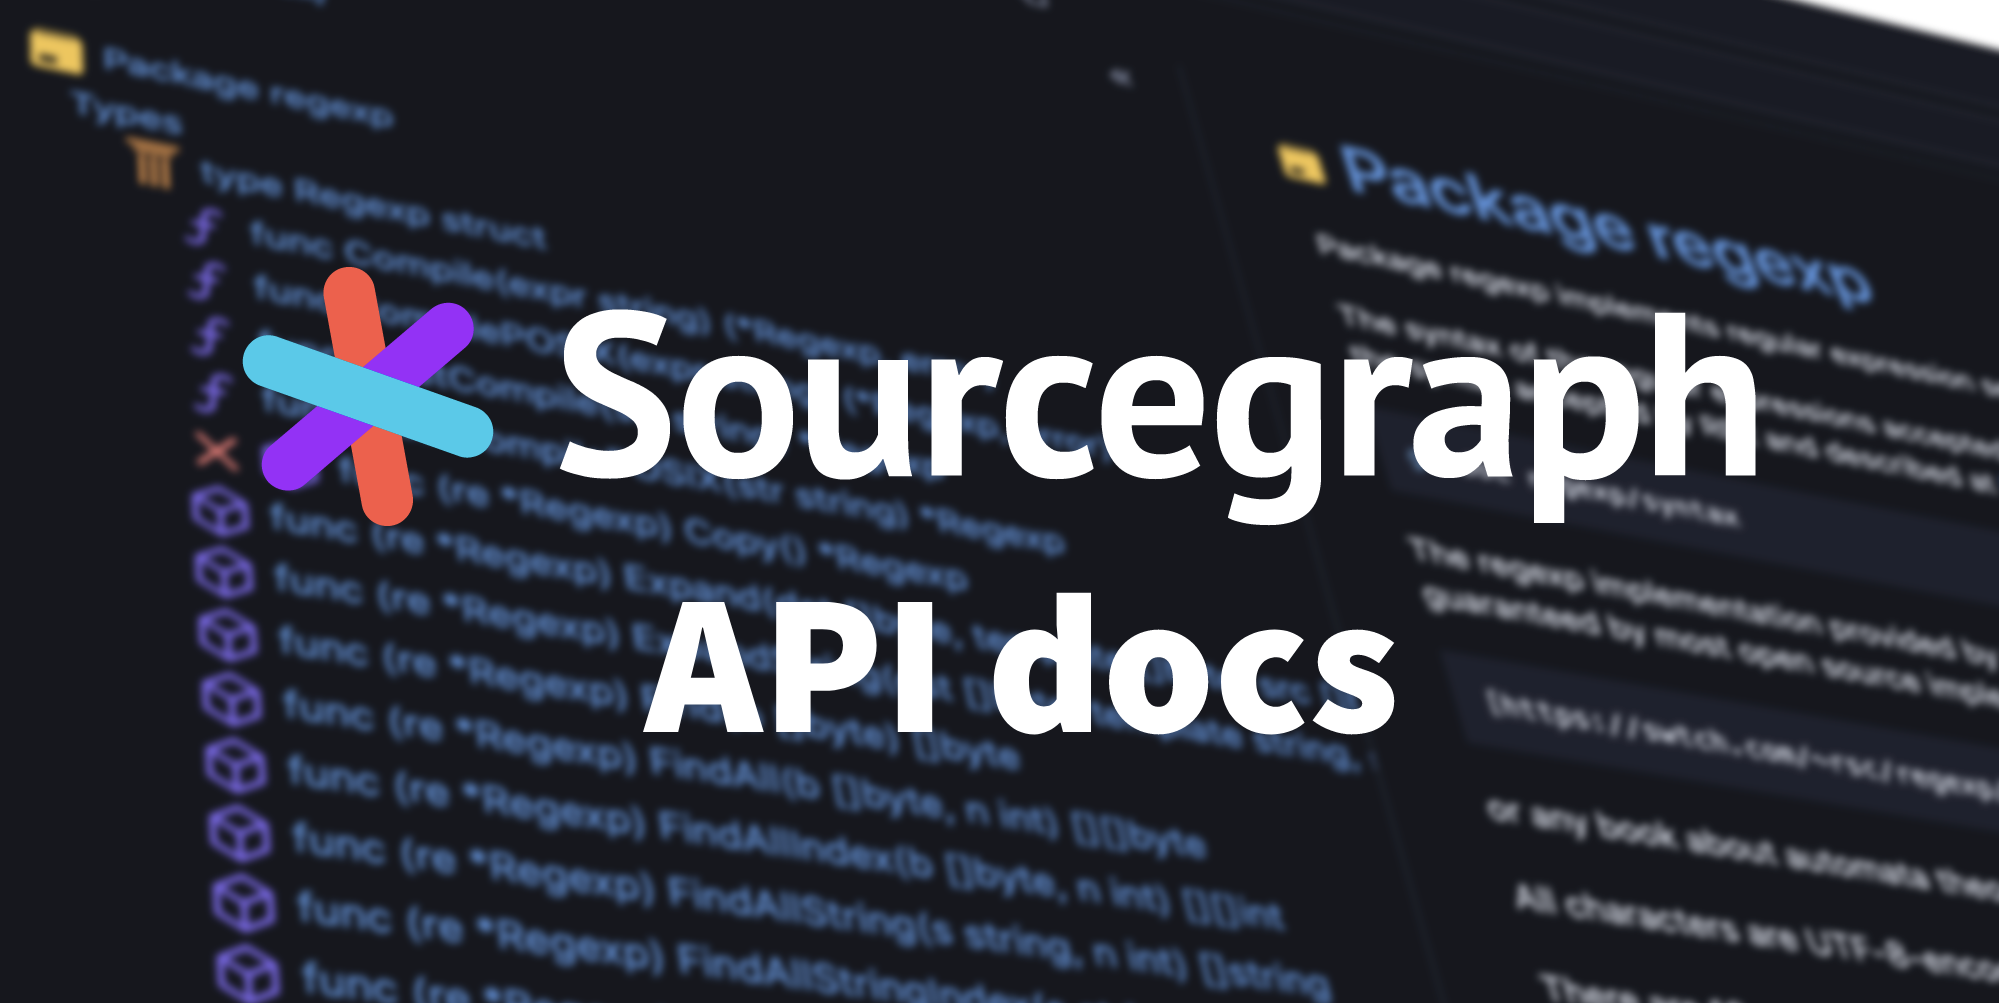 Sneak peek: API documentation generated for all your code